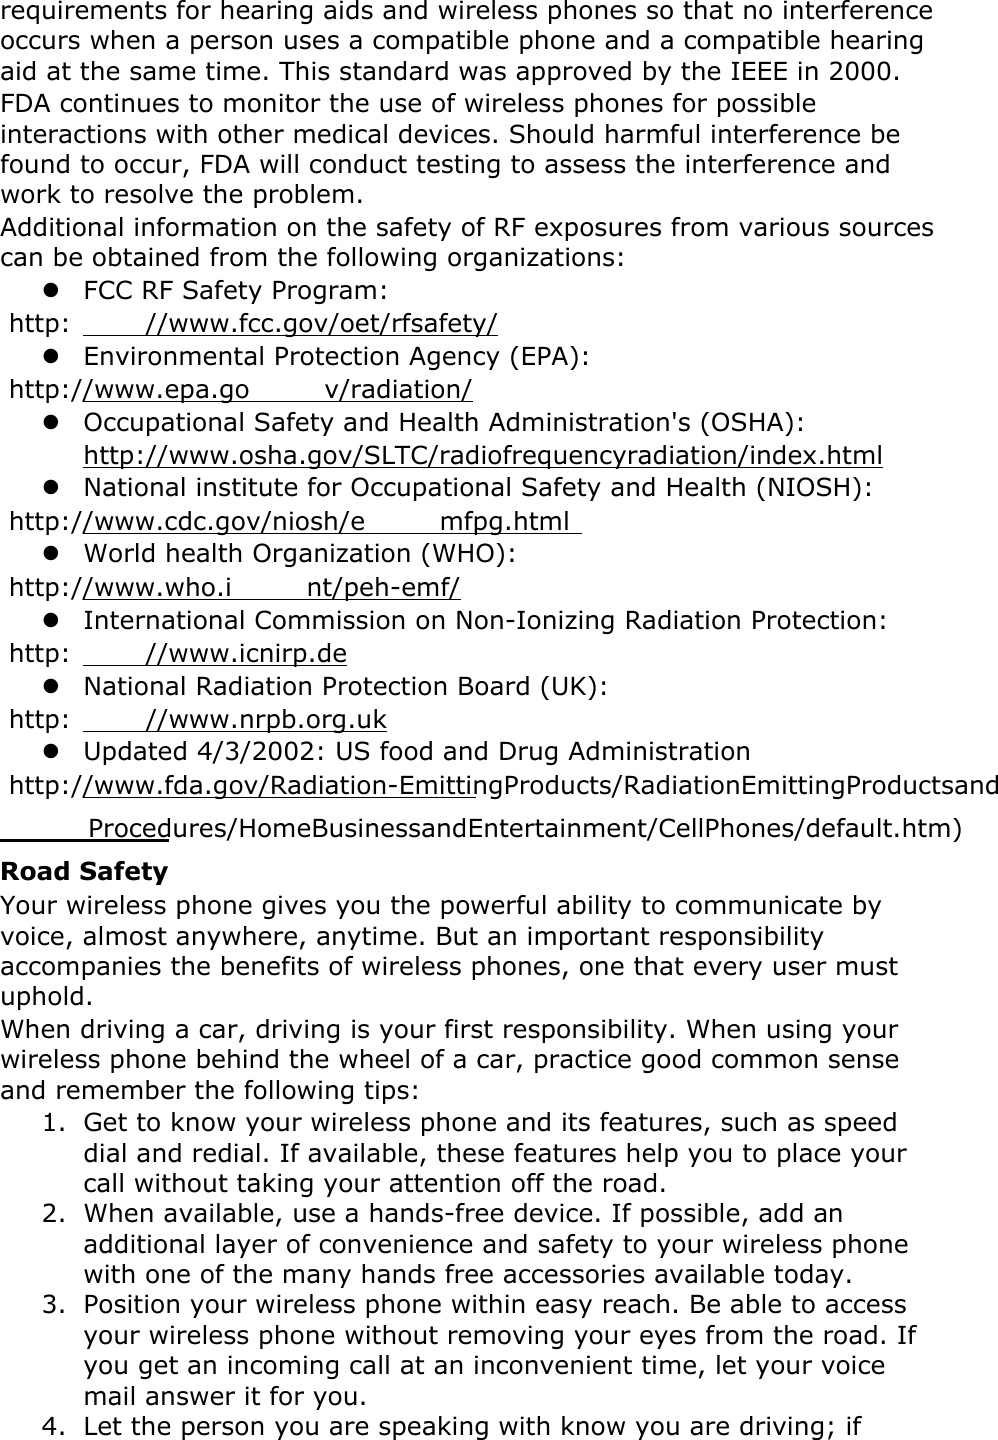 requirements for hearing aids and wireless phones so that no interference occurs when a person uses a compatible phone and a compatible hearing aid at the same time. This standard was approved by the IEEE in 2000. FDA continues to monitor the use of wireless phones for possible interactions with other medical devices. Should harmful interference be found to occur, FDA will conduct testing to assess the interference and work to resolve the problem. Additional information on the safety of RF exposures from various sources can be obtained from the following organizations:  FCC RF Safety Program:  http: //www.fcc.gov/oet/rfsafety/  Environmental Protection Agency (EPA):  http://www.epa.go v/radiation/  Occupational Safety and Health Administration&apos;s (OSHA):         http://www.osha.gov/SLTC/radiofrequencyradiation/index.html  National institute for Occupational Safety and Health (NIOSH):  http://www.cdc.gov/niosh/e mfpg.html   World health Organization (WHO):  http://www.who.i nt/peh-emf/  International Commission on Non-Ionizing Radiation Protection:  http: //www.icnirp.de  National Radiation Protection Board (UK):  http: //www.nrpb.org.uk  Updated 4/3/2002: US food and Drug Administration  http://www.fda.gov/Radiation-EmittingProducts/RadiationEmittingProductsand          Procedures/HomeBusinessandEntertainment/CellPhones/default.htm)  Road Safety Your wireless phone gives you the powerful ability to communicate by voice, almost anywhere, anytime. But an important responsibility accompanies the benefits of wireless phones, one that every user must uphold. When driving a car, driving is your first responsibility. When using your wireless phone behind the wheel of a car, practice good common sense and remember the following tips: 1. Get to know your wireless phone and its features, such as speed dial and redial. If available, these features help you to place your call without taking your attention off the road. 2. When available, use a hands-free device. If possible, add an additional layer of convenience and safety to your wireless phone with one of the many hands free accessories available today. 3. Position your wireless phone within easy reach. Be able to access your wireless phone without removing your eyes from the road. If you get an incoming call at an inconvenient time, let your voice mail answer it for you. 4. Let the person you are speaking with know you are driving; if 